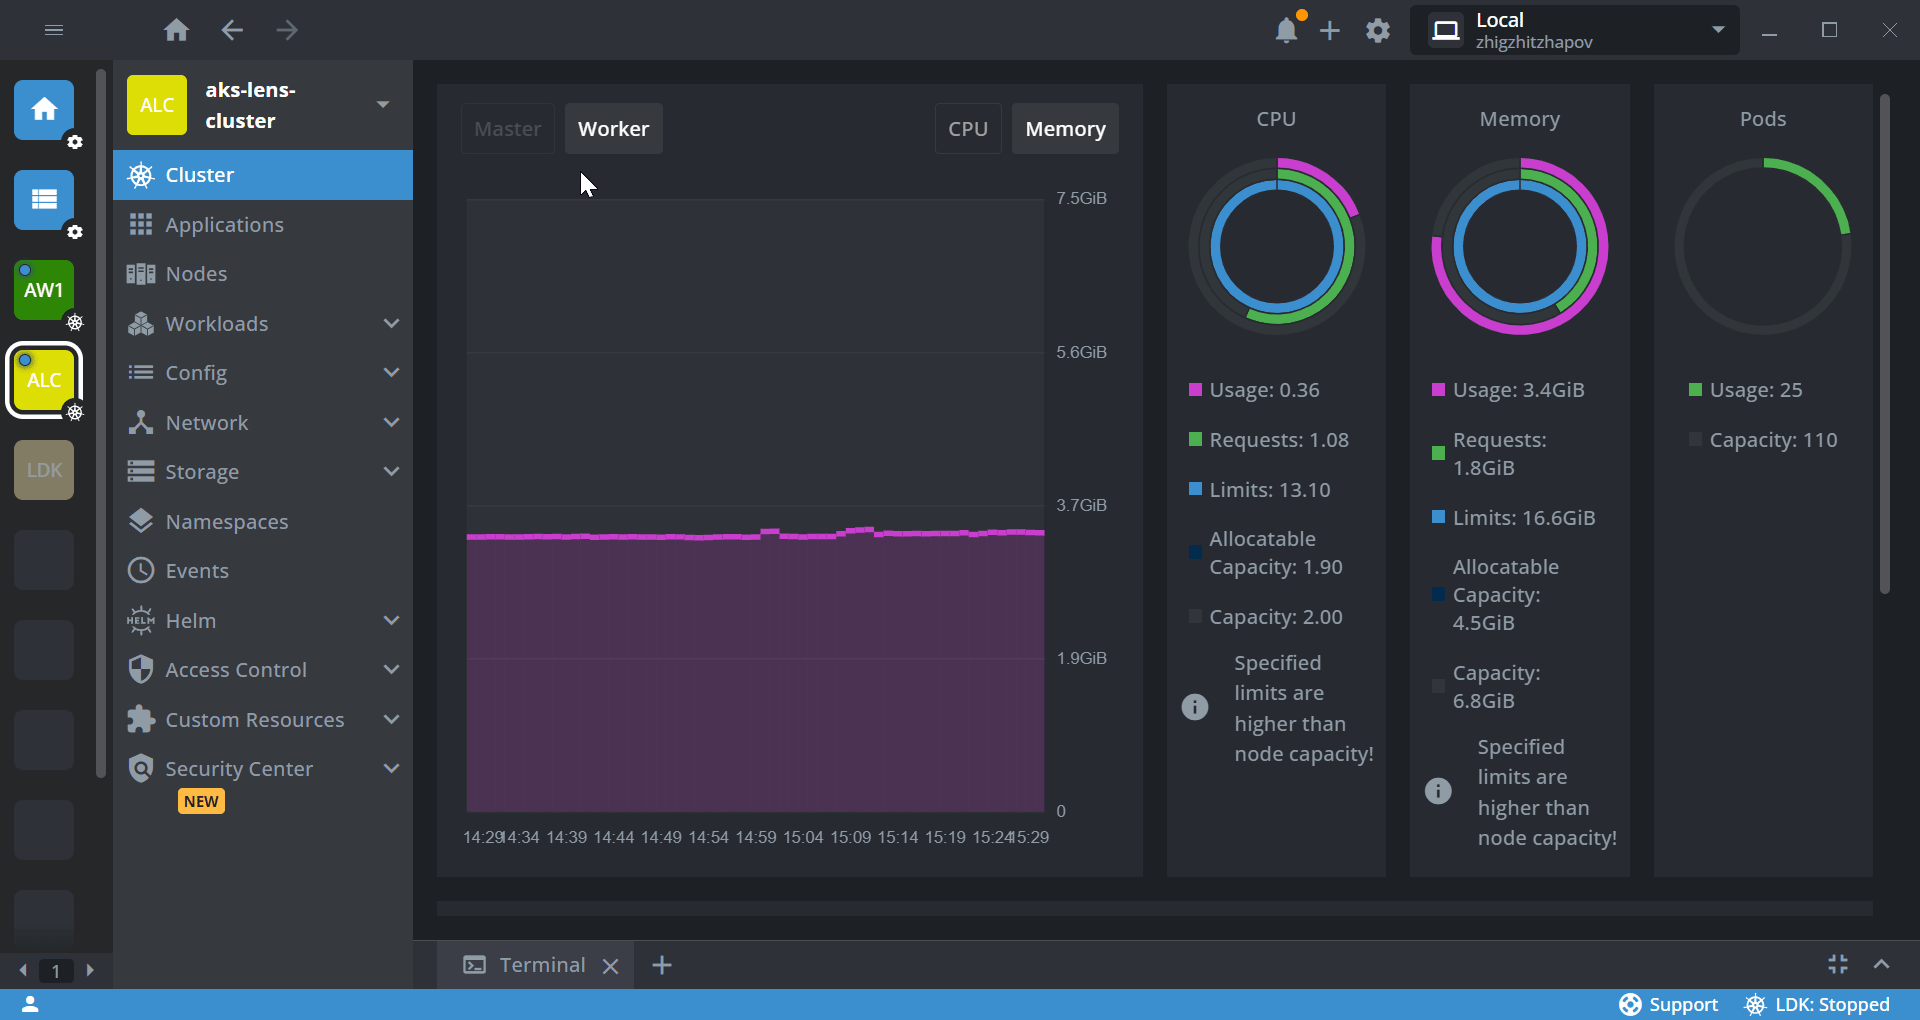 Introducing the Cluster view